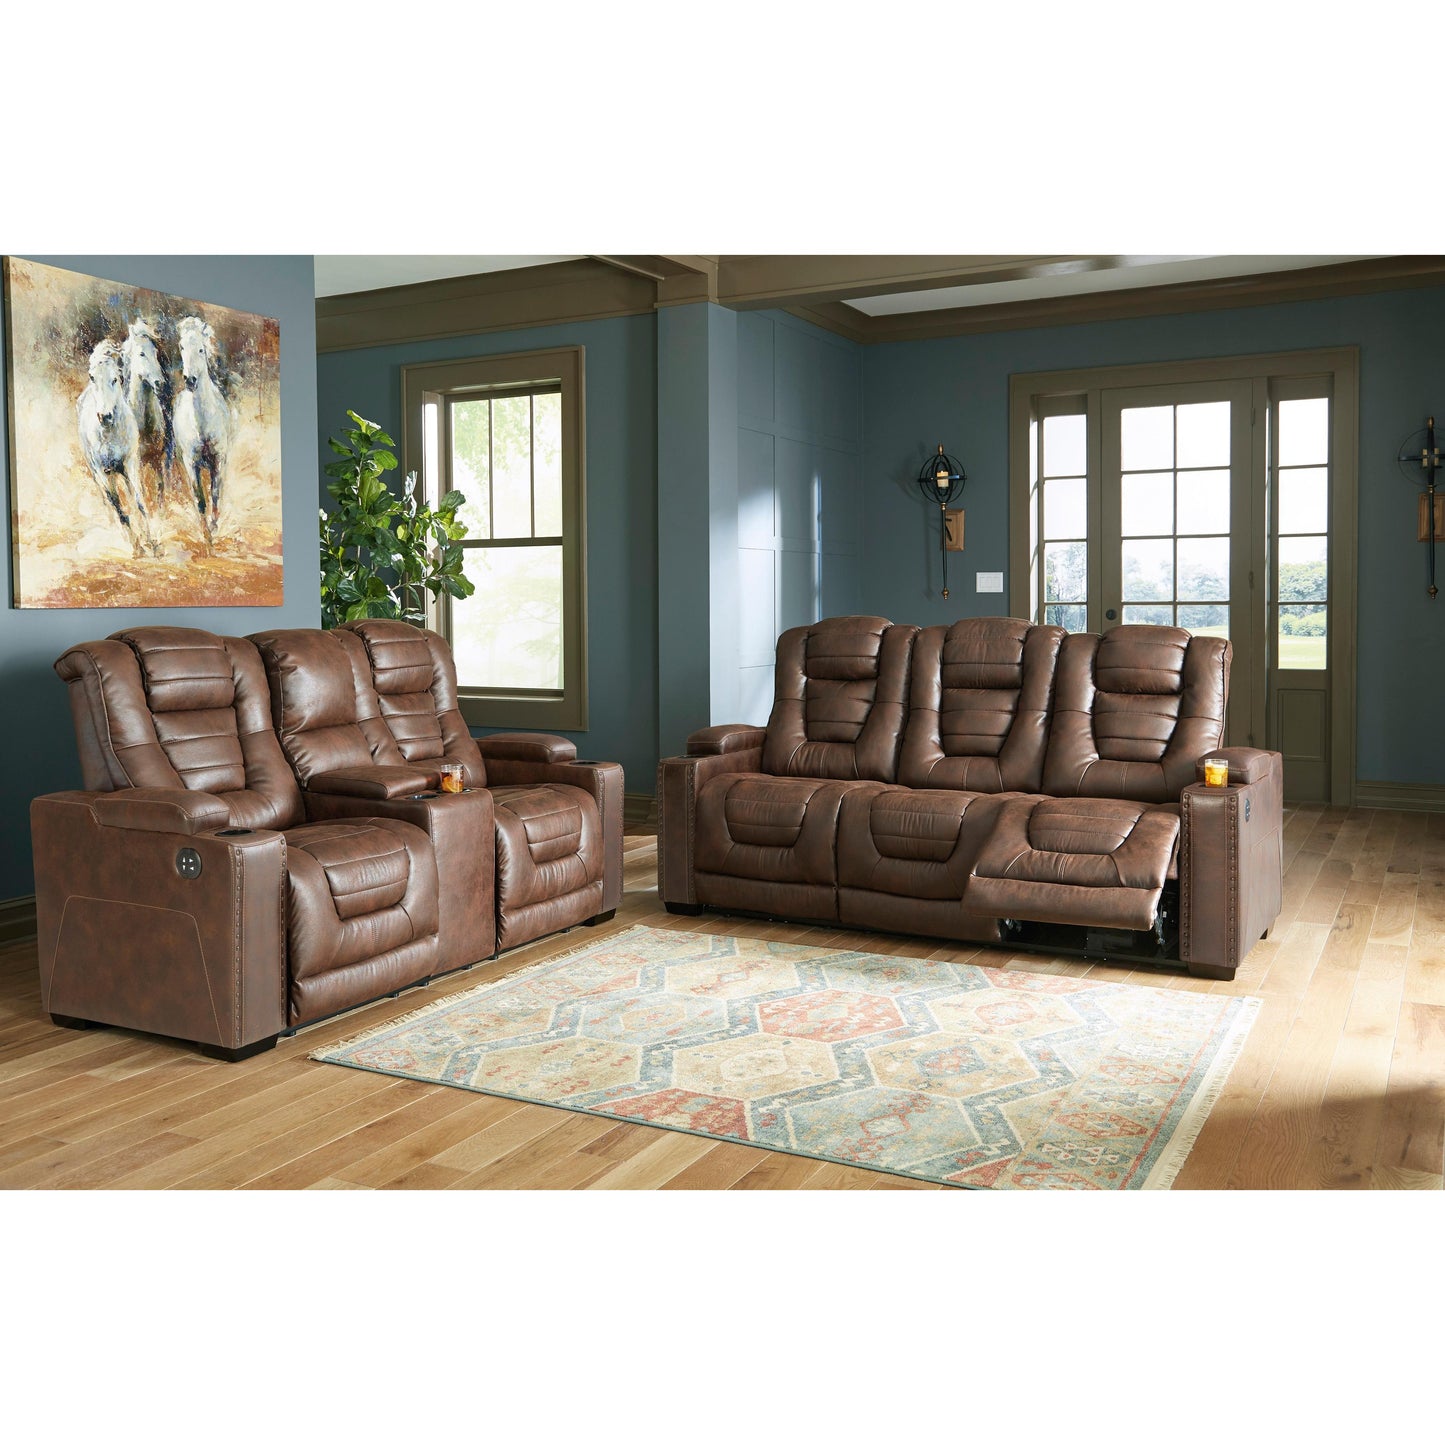 Signature Design by Ashley Owner's Box Power Reclining Leather Look Loveseat 2450518